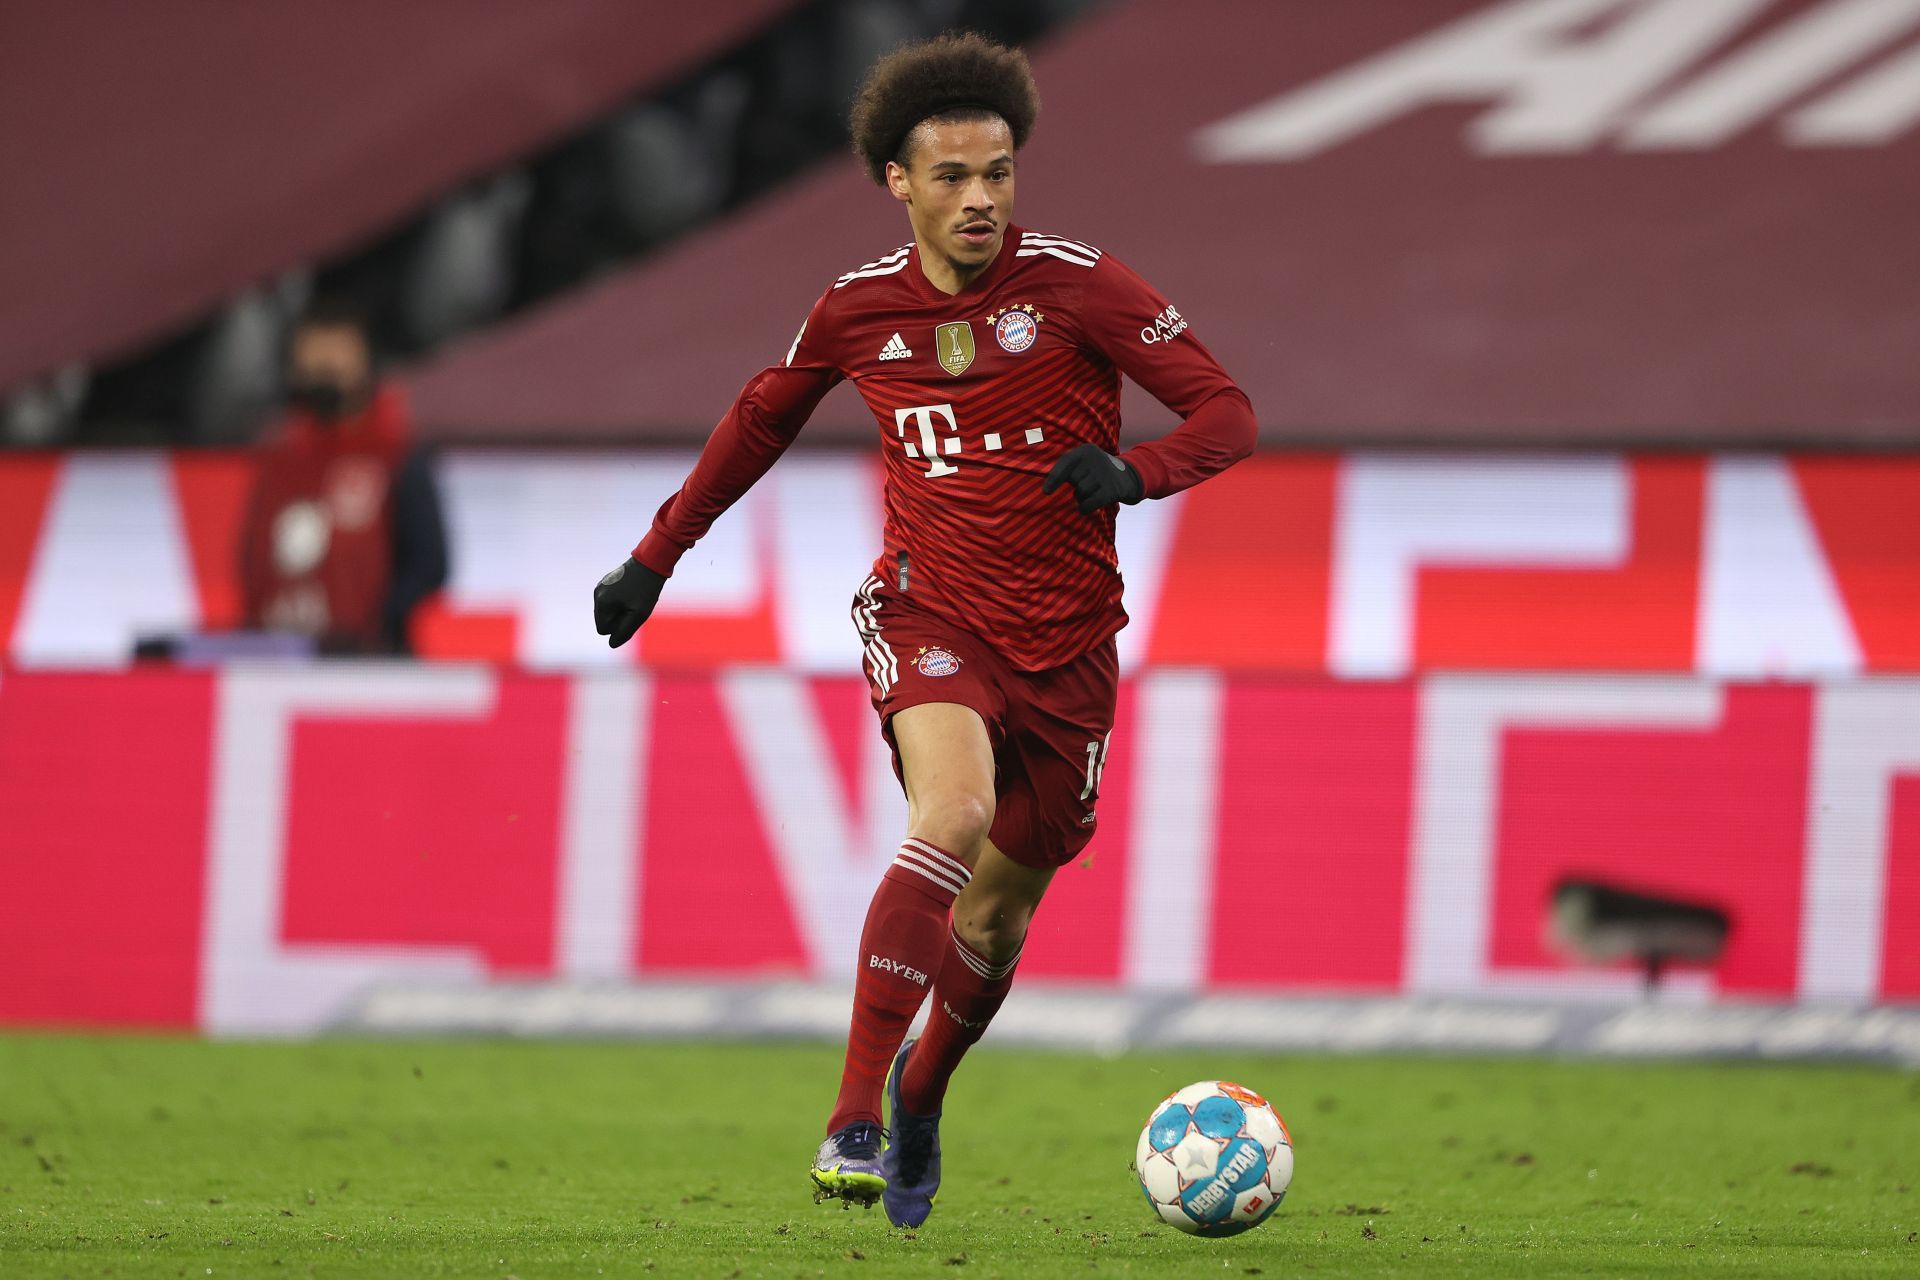 Leroy Sane has become an important player for Bayern Munich after a slow start.